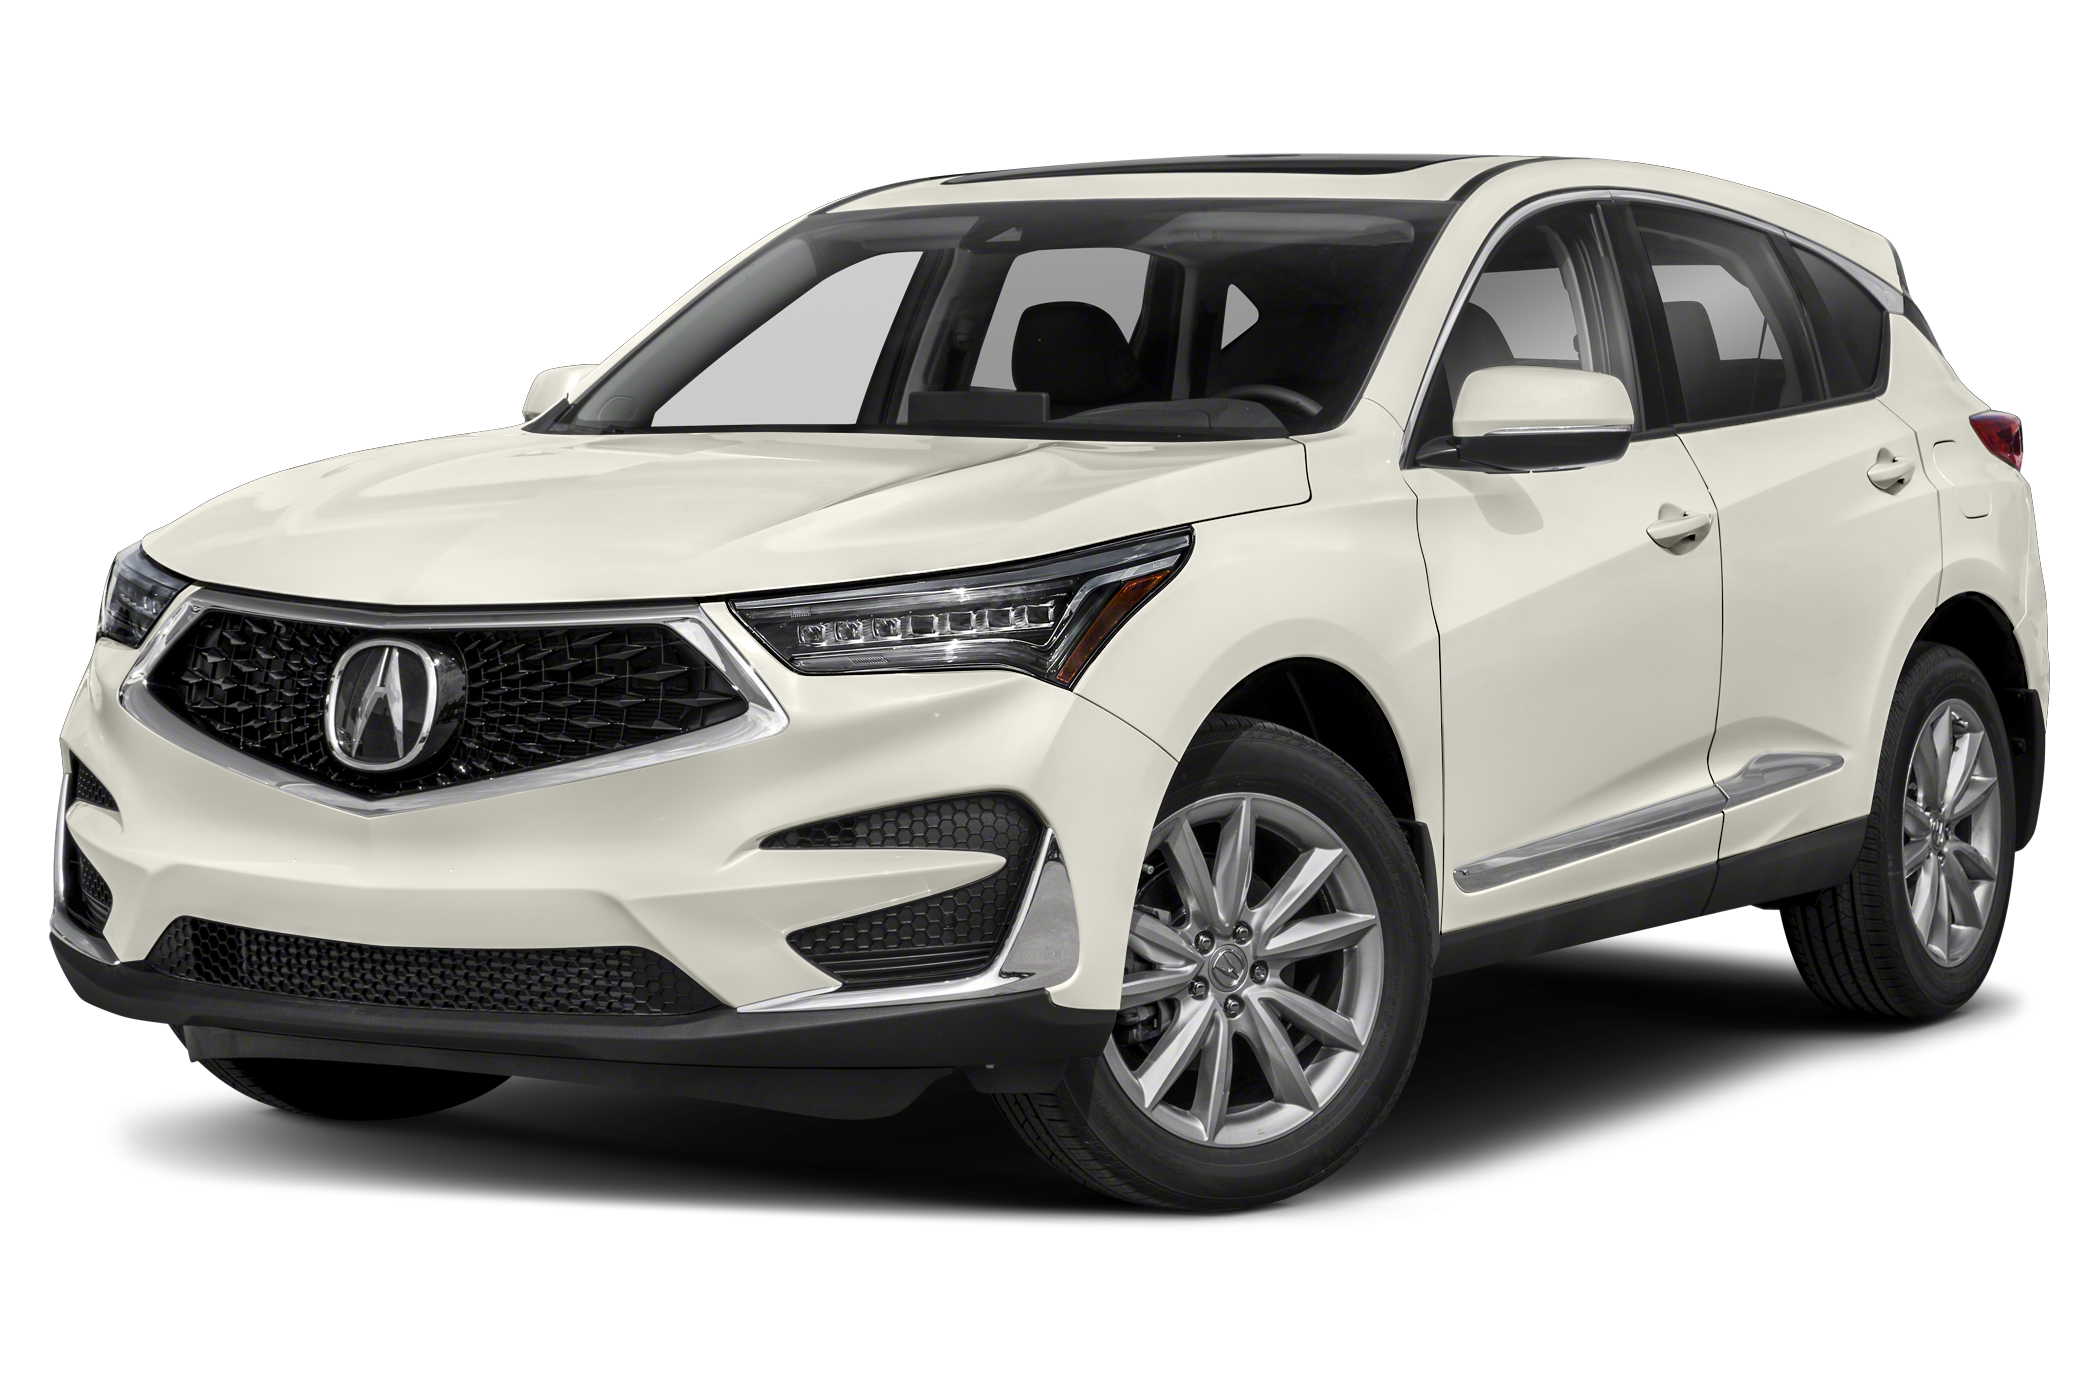 2019 Acura RDX First Drive: Respect Earned